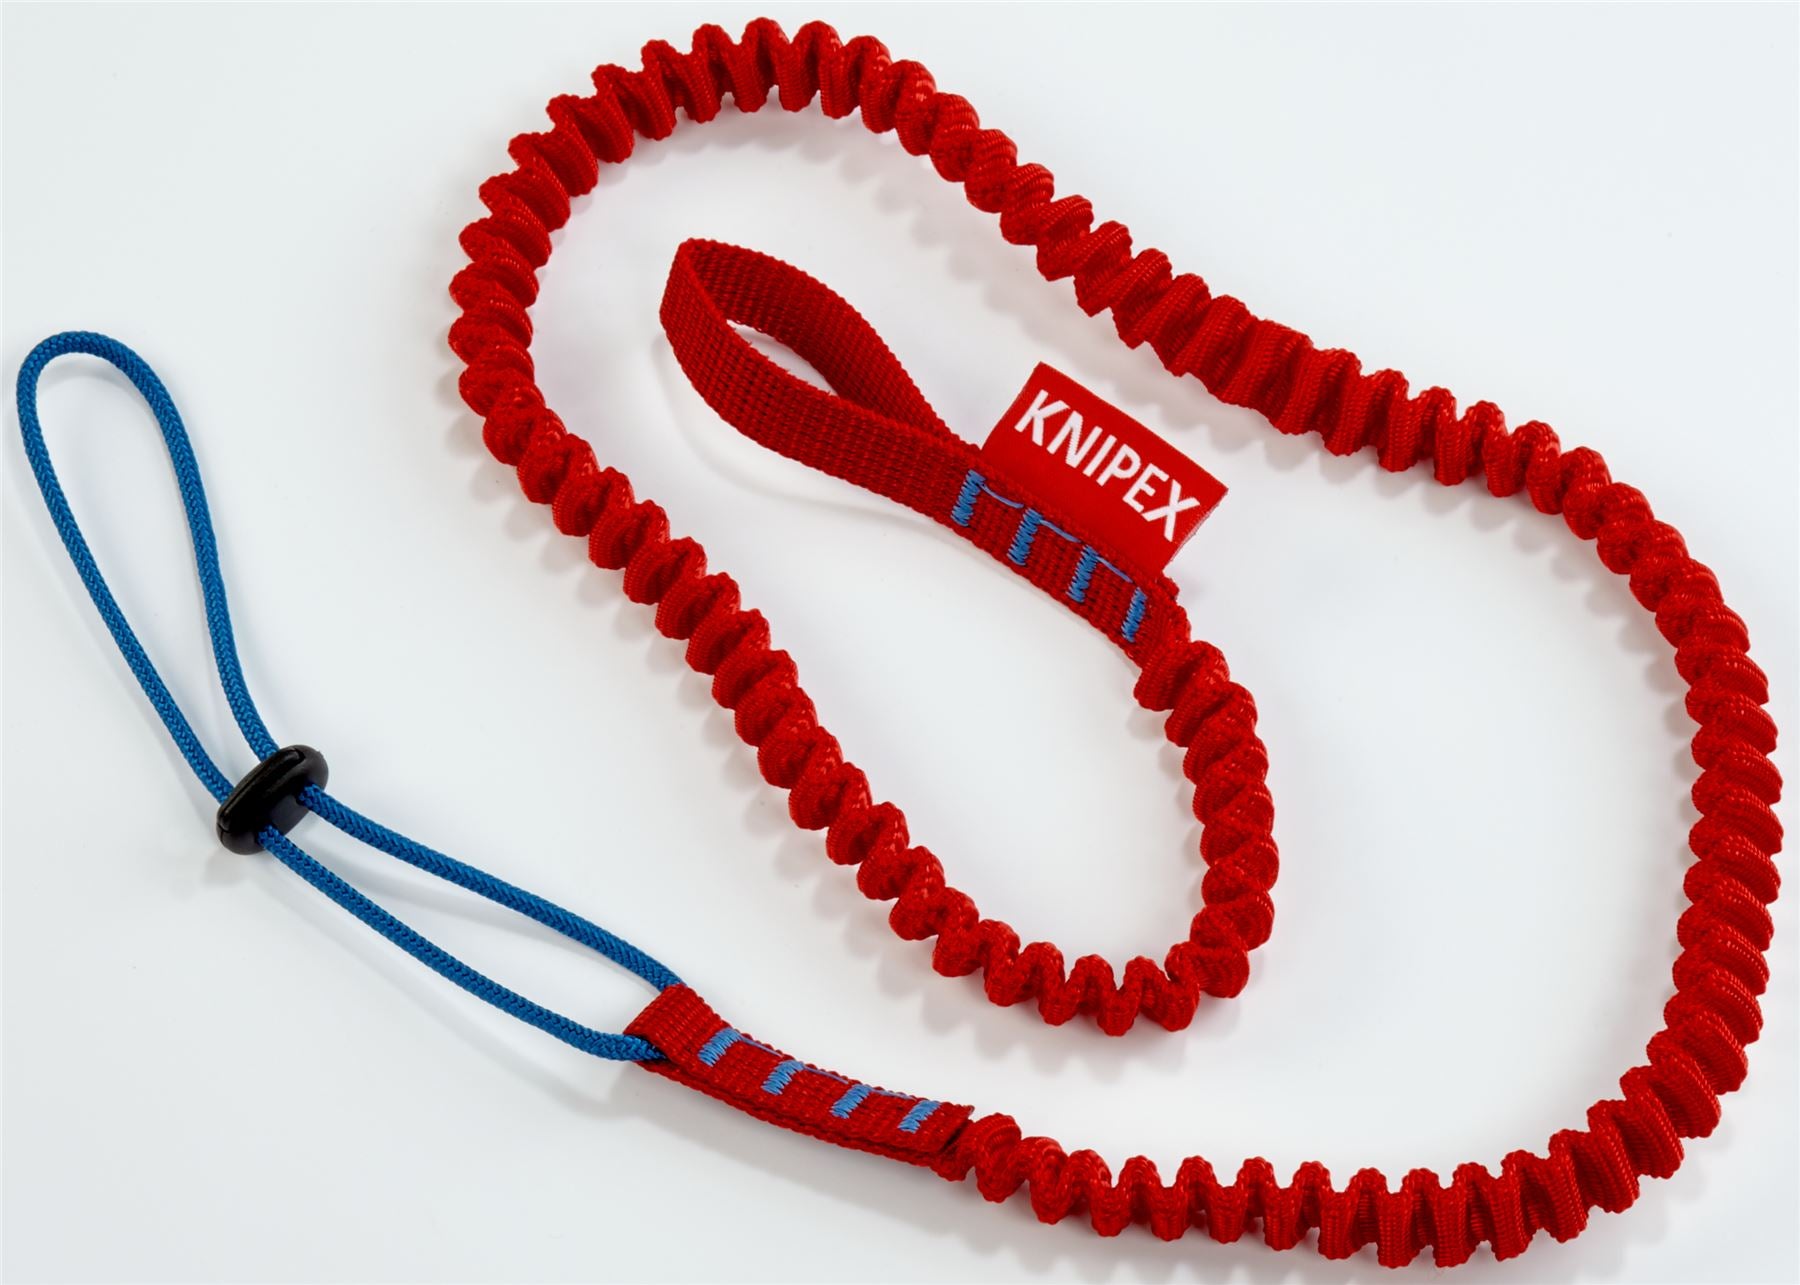 Knipex Tool Tether Lanyard Working at Height 1.5kg Max Load 00 50 01 T BK